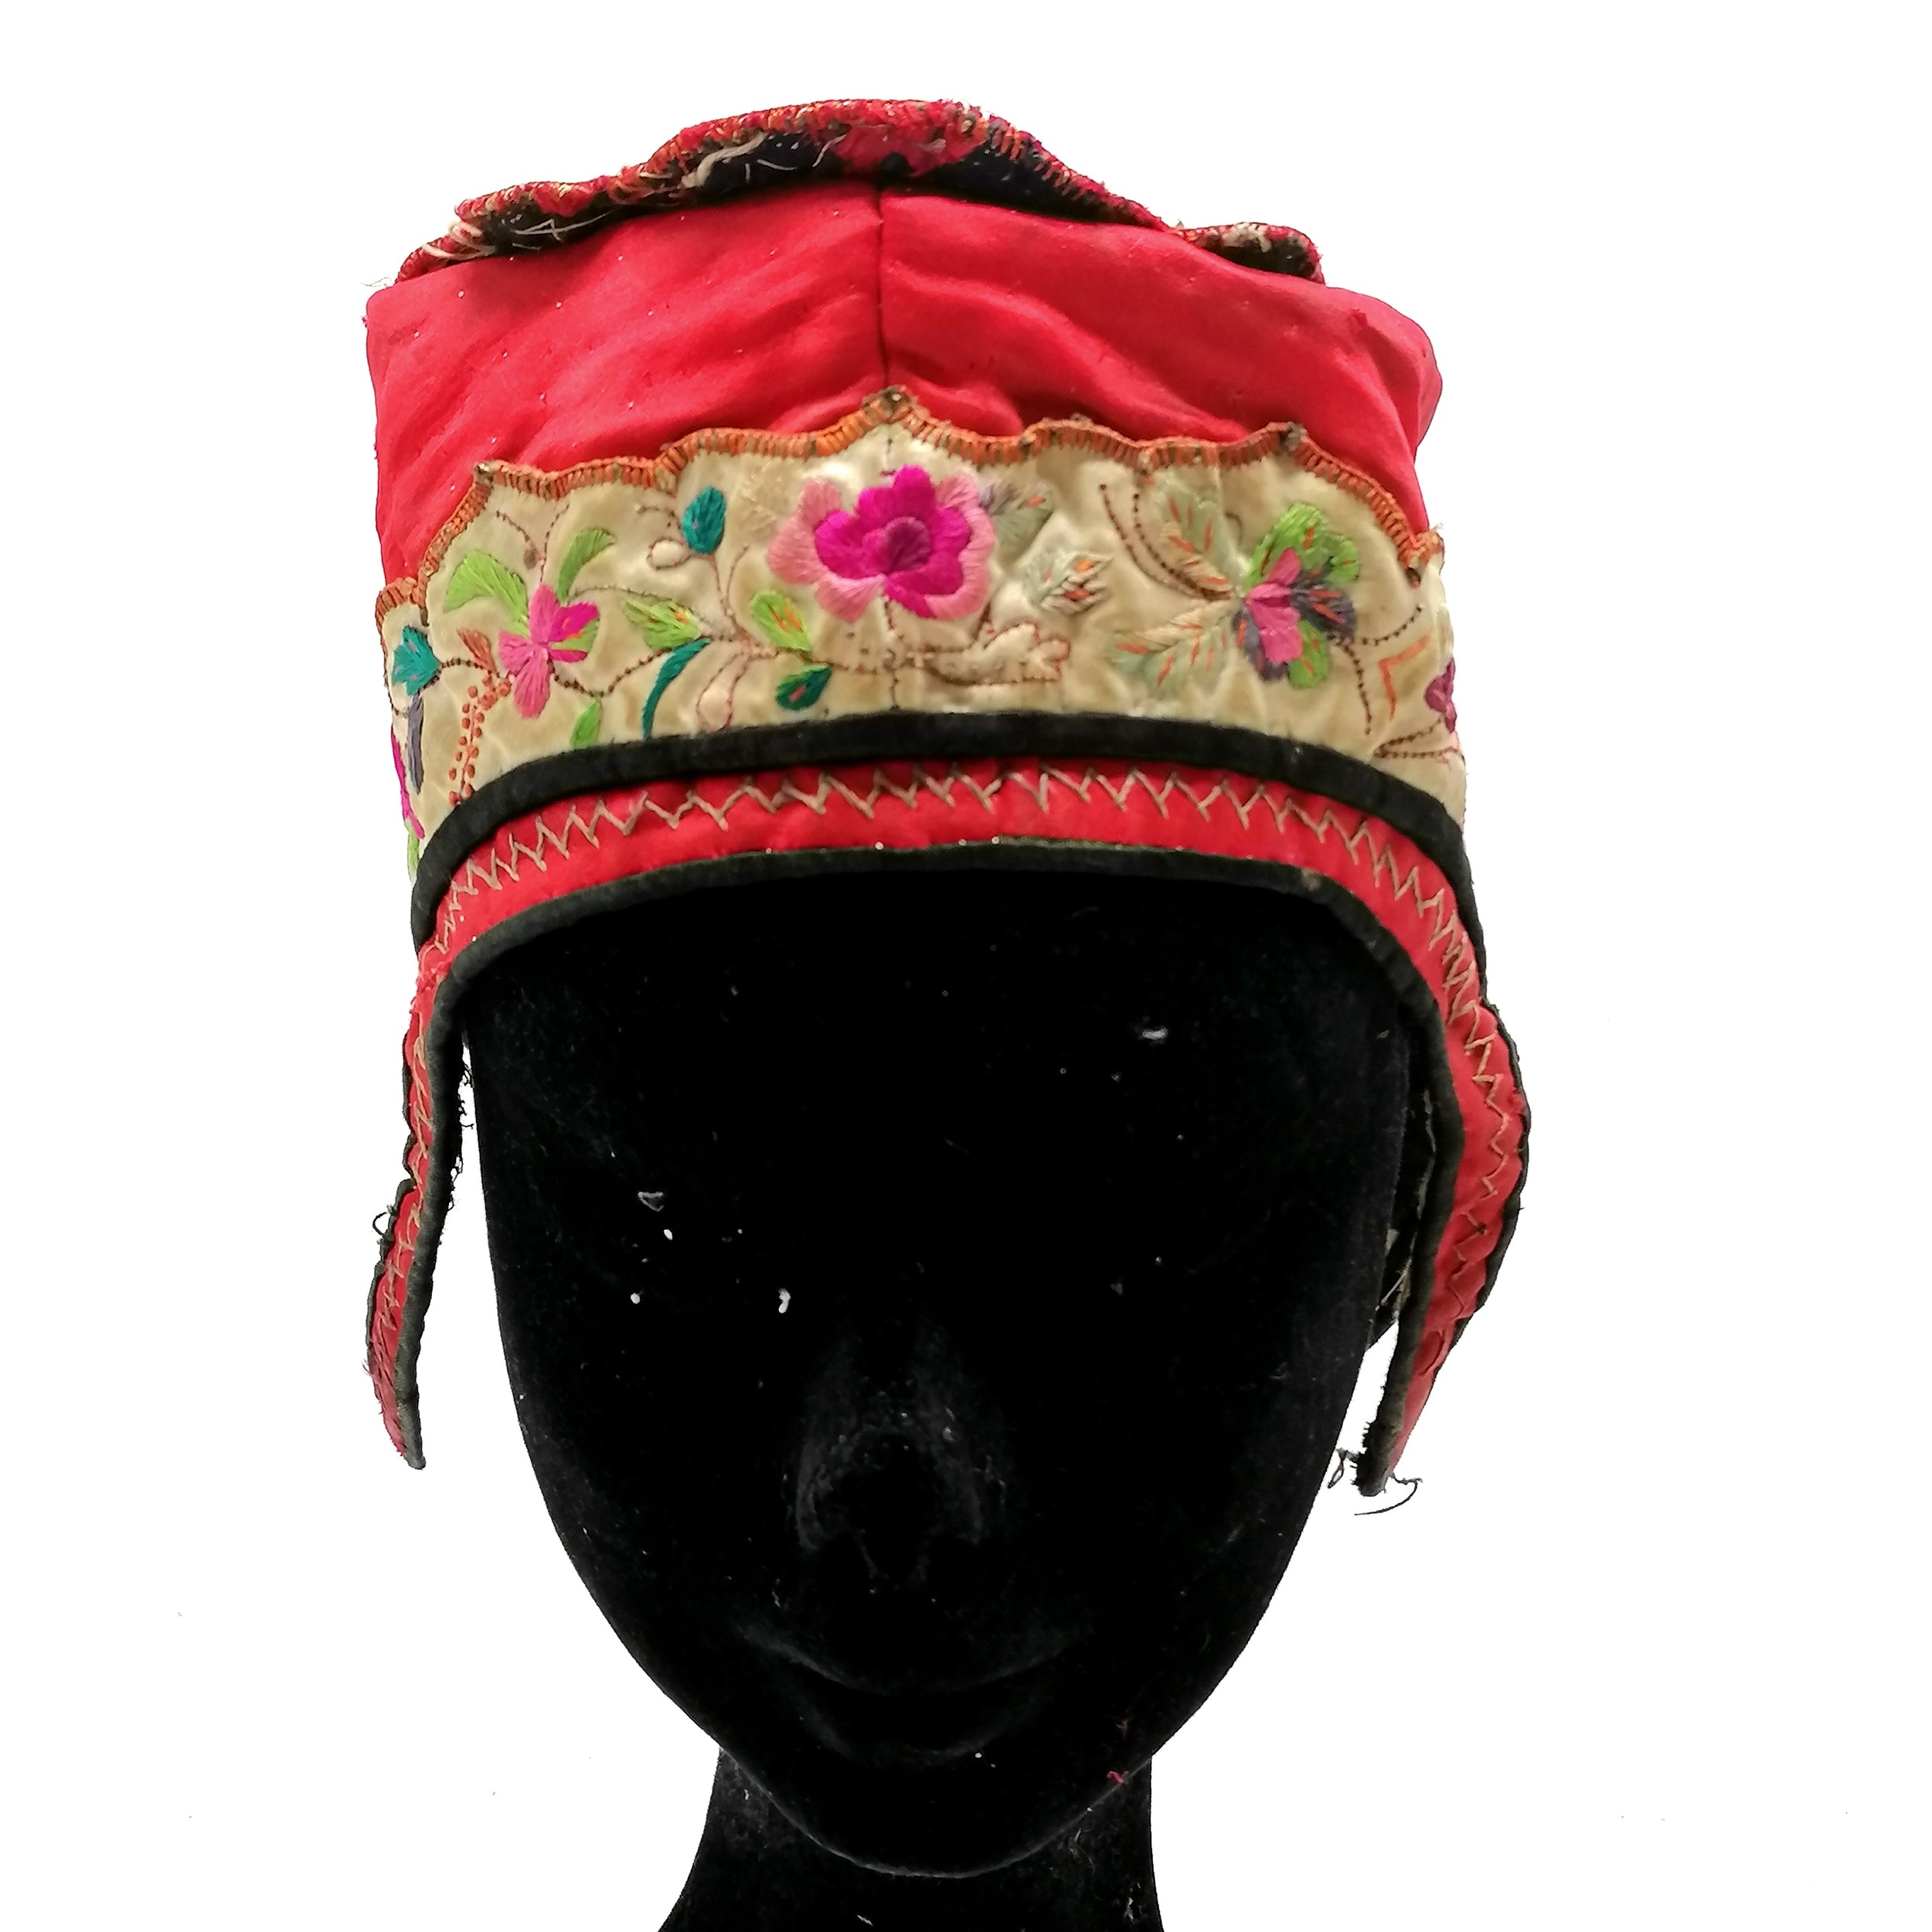 Red antique silk embroidered hat with fringe decoration - slight mark but in used condition - Image 4 of 5